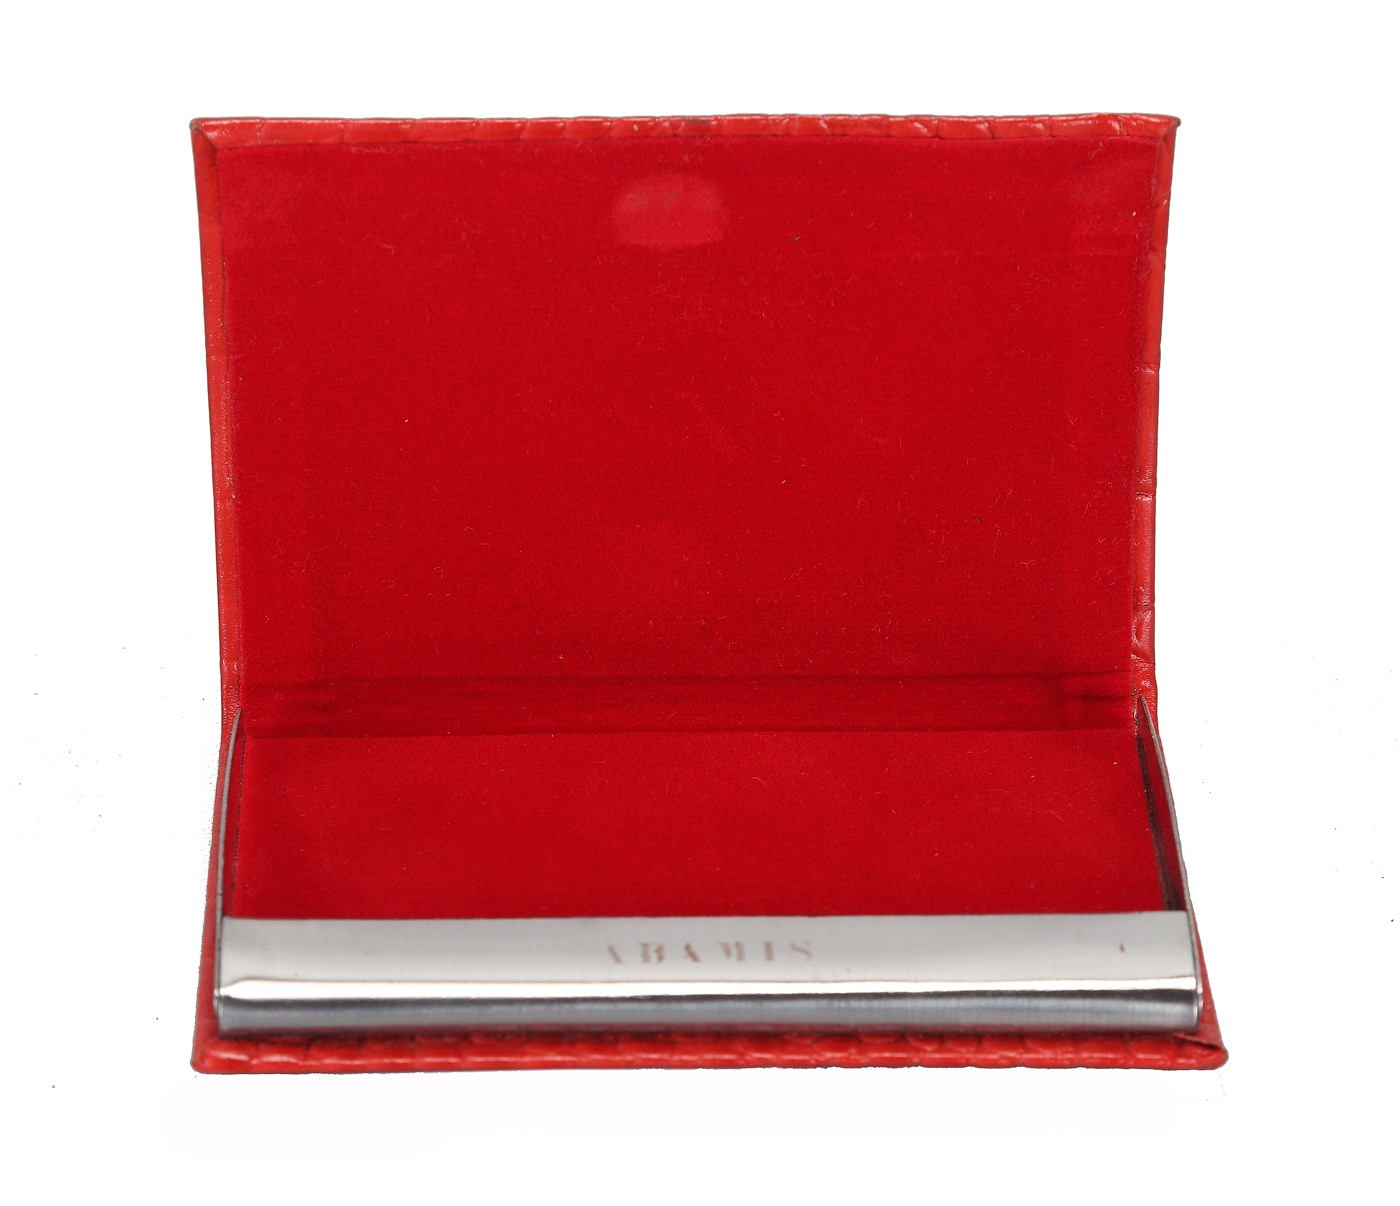 W170--Metal Body Credit, Visting Card Case Bounded In Genuine Leather - Red